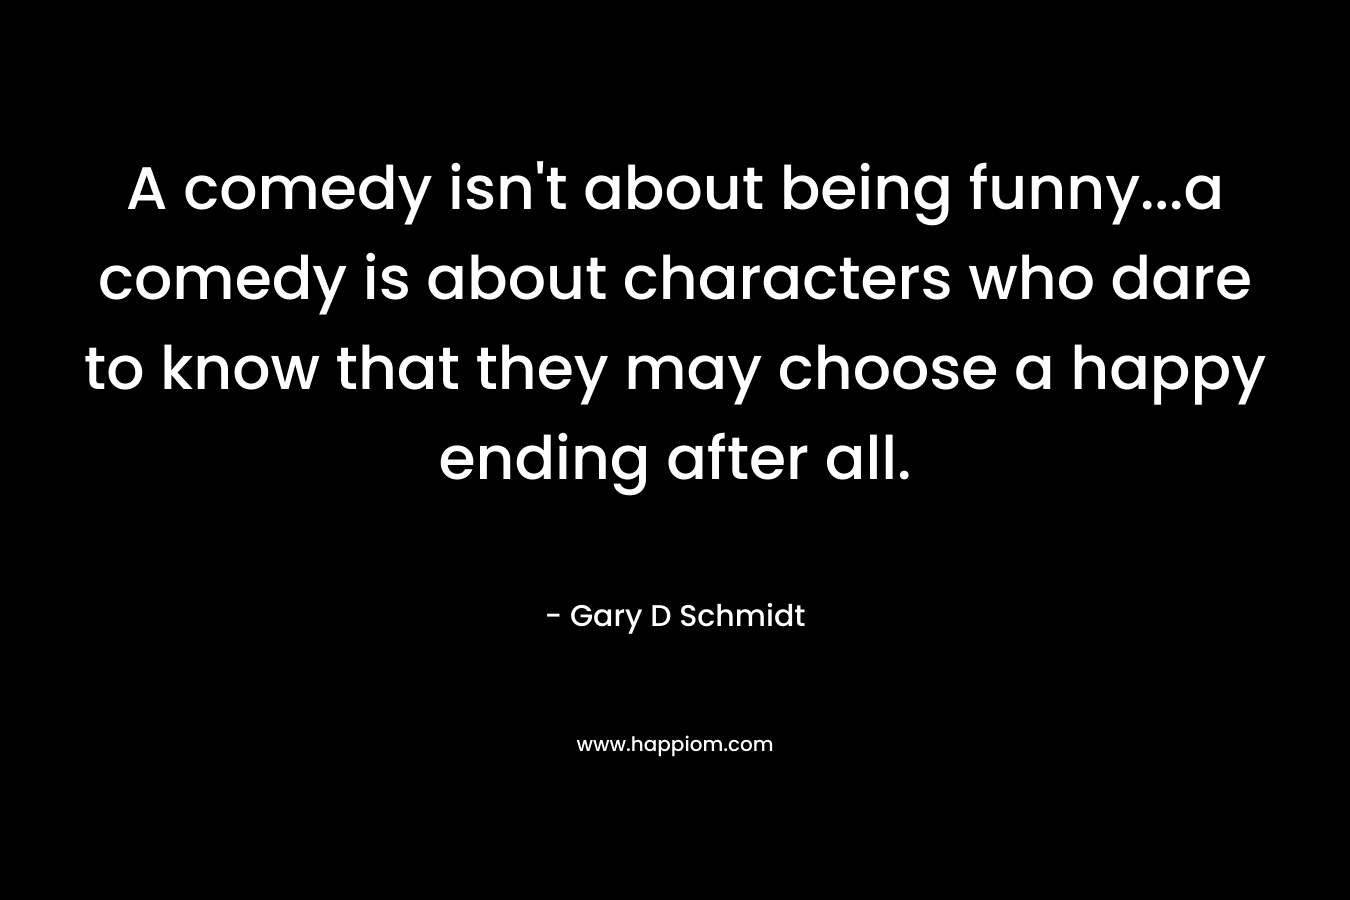 A comedy isn’t about being funny…a comedy is about characters who dare to know that they may choose a happy ending after all. – Gary D Schmidt